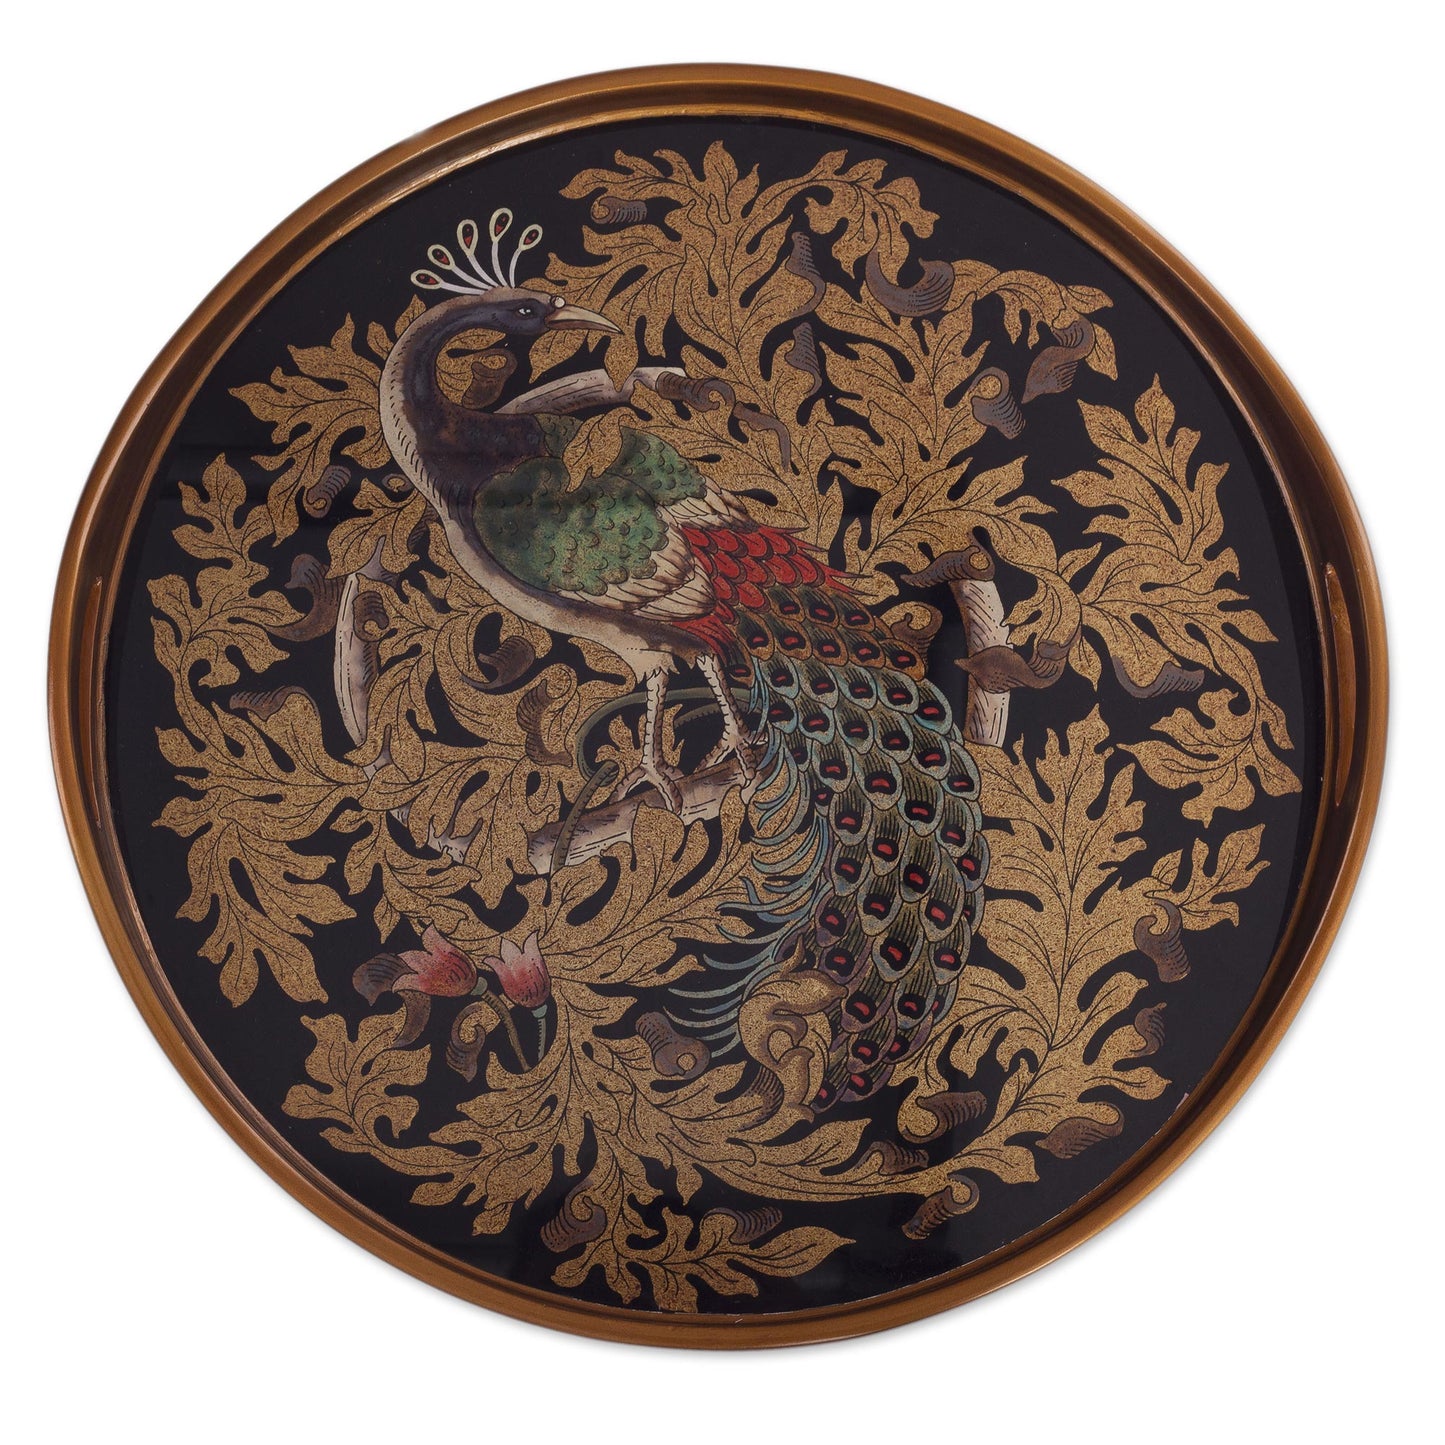 Mystic Peacock Reverse-Painted Glass Peacock Tray from Peru